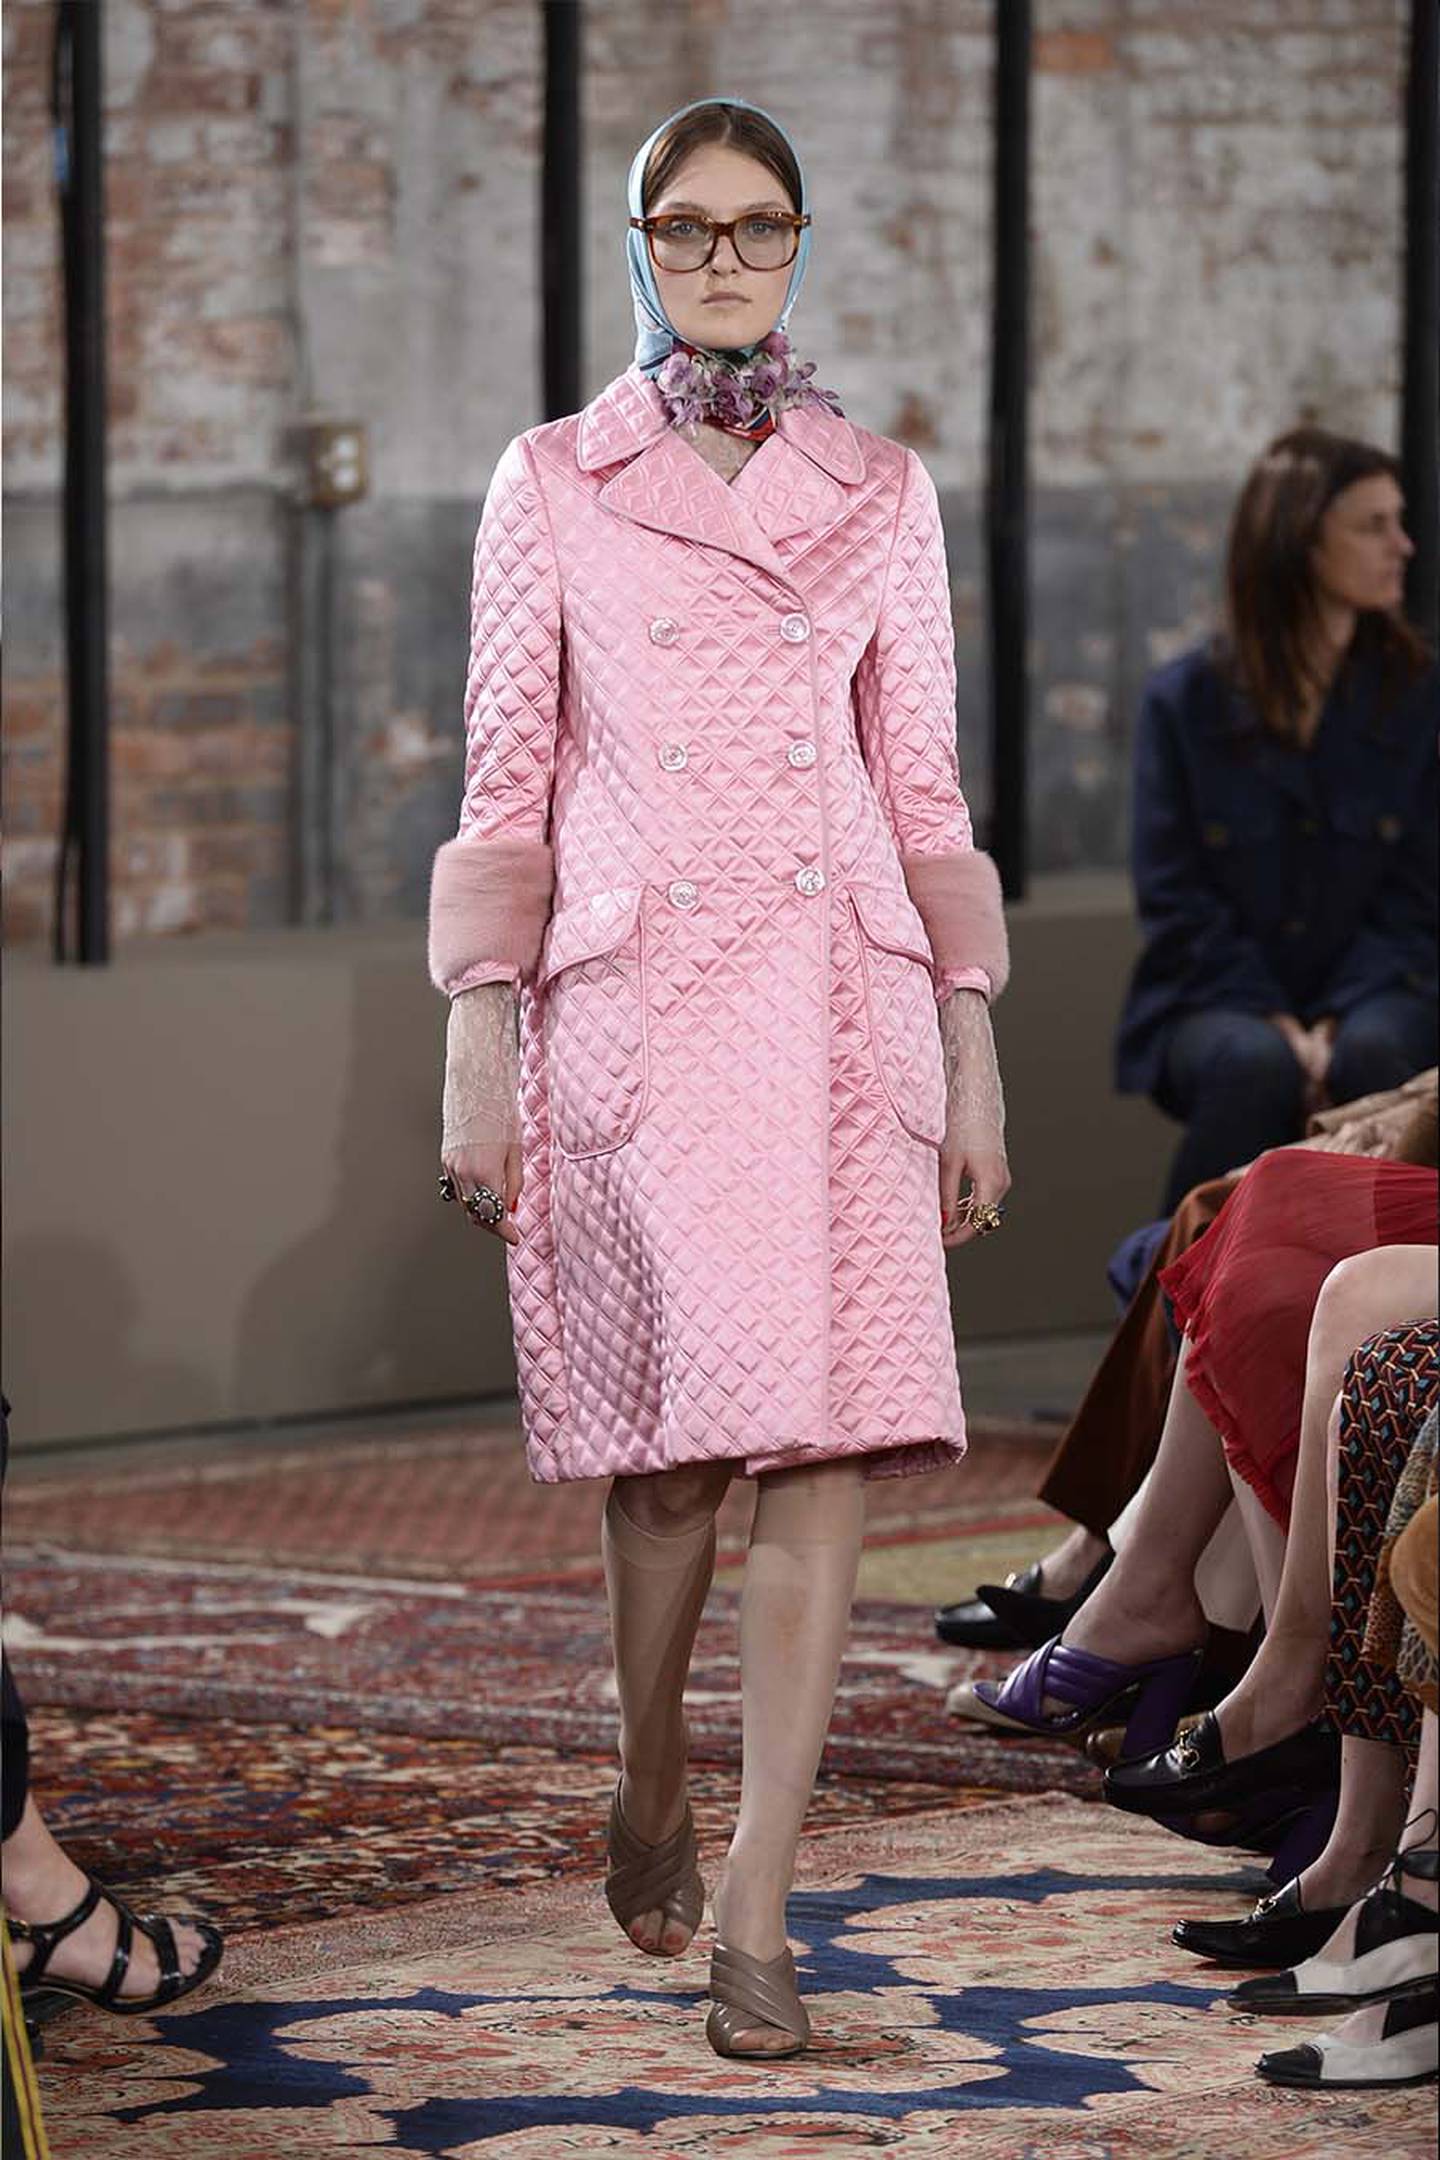 Headscarves like those worn by the Queen have repeatedly appeared in Alessandro Michele's Gucci shows.